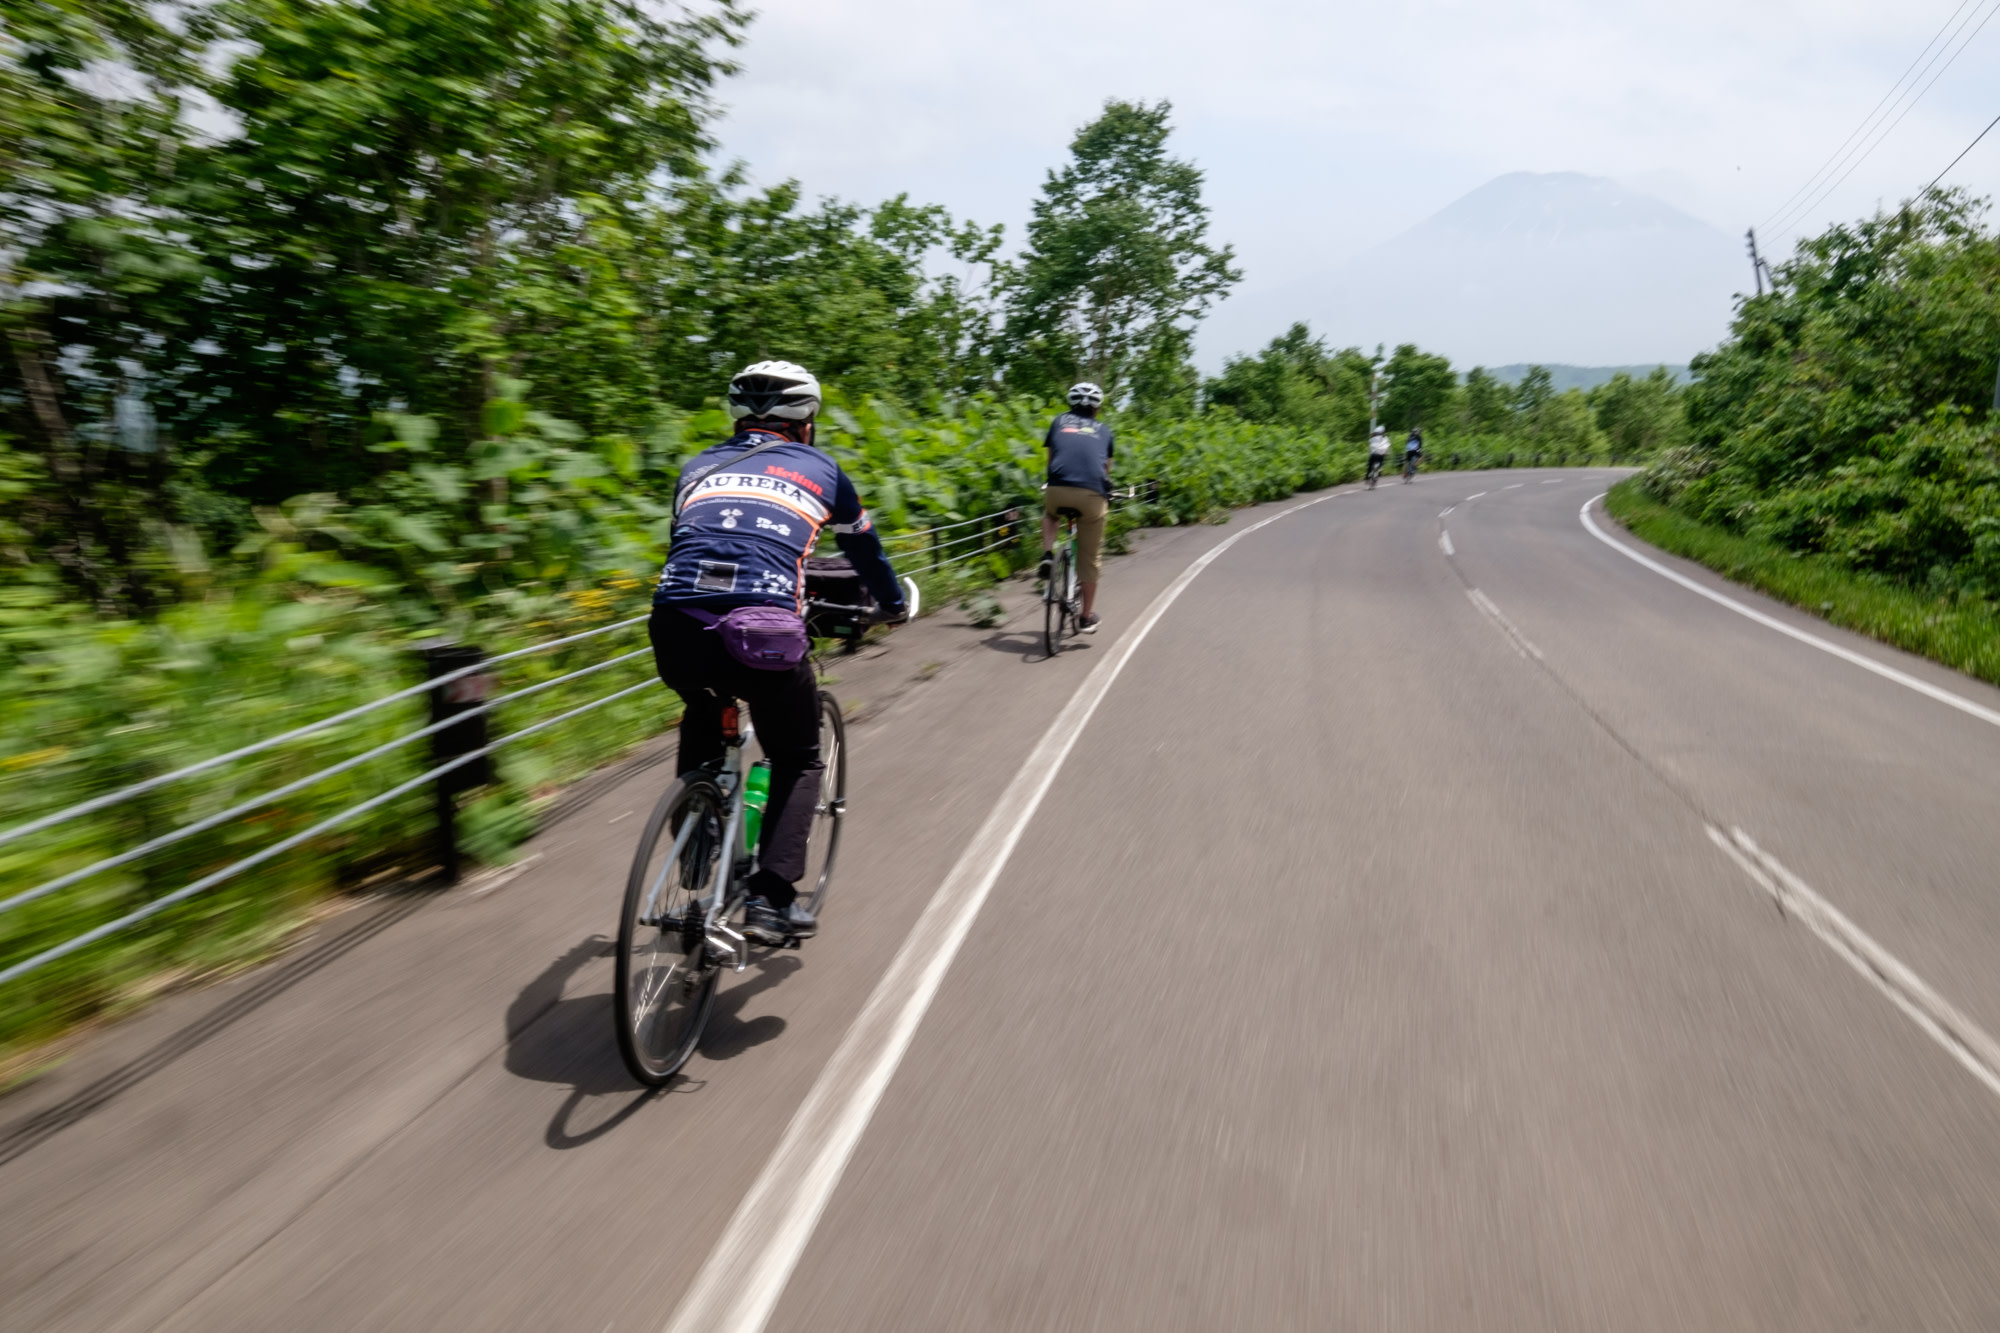 Cyclists descend a hill at speed with Mount Yotei in the background